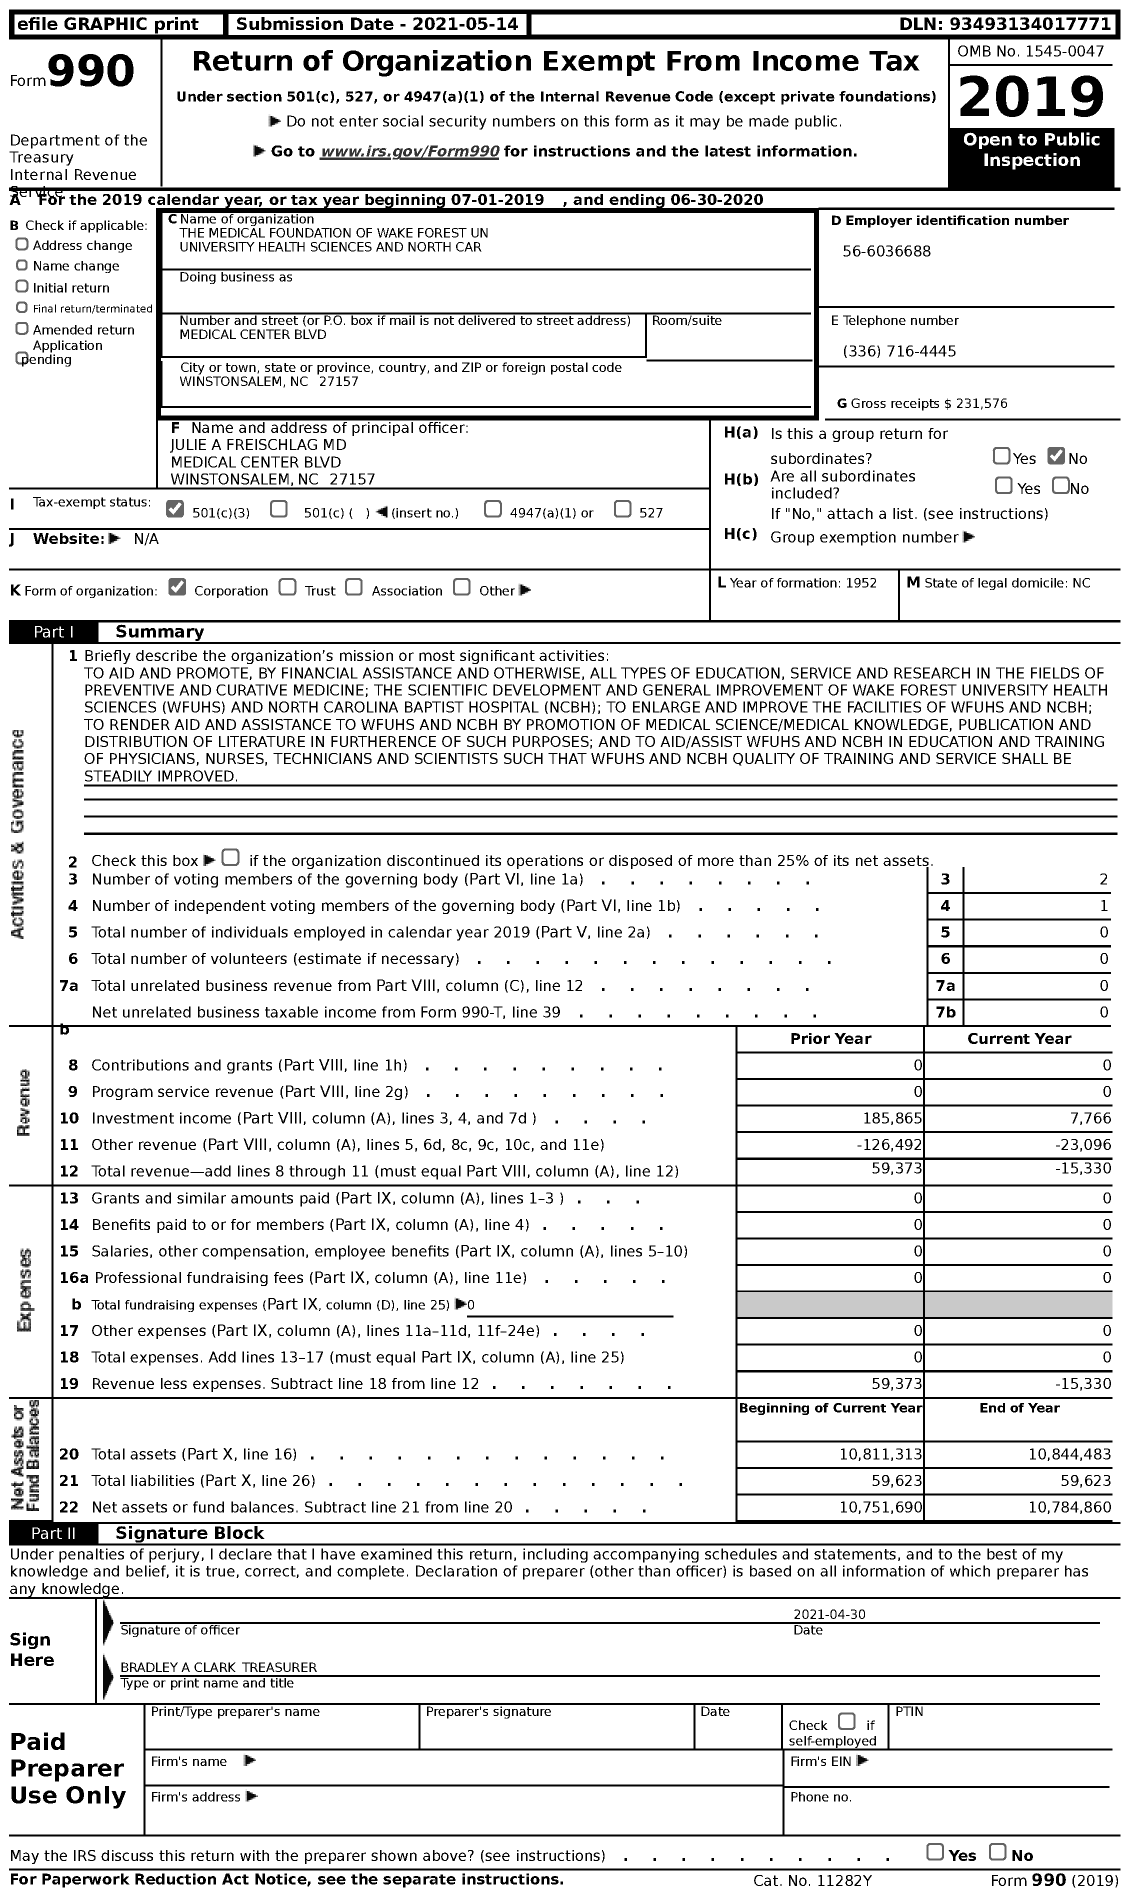 Image of first page of 2019 Form 990 for The Medical Foundation of Wake Forest University Health Sciences and North Car